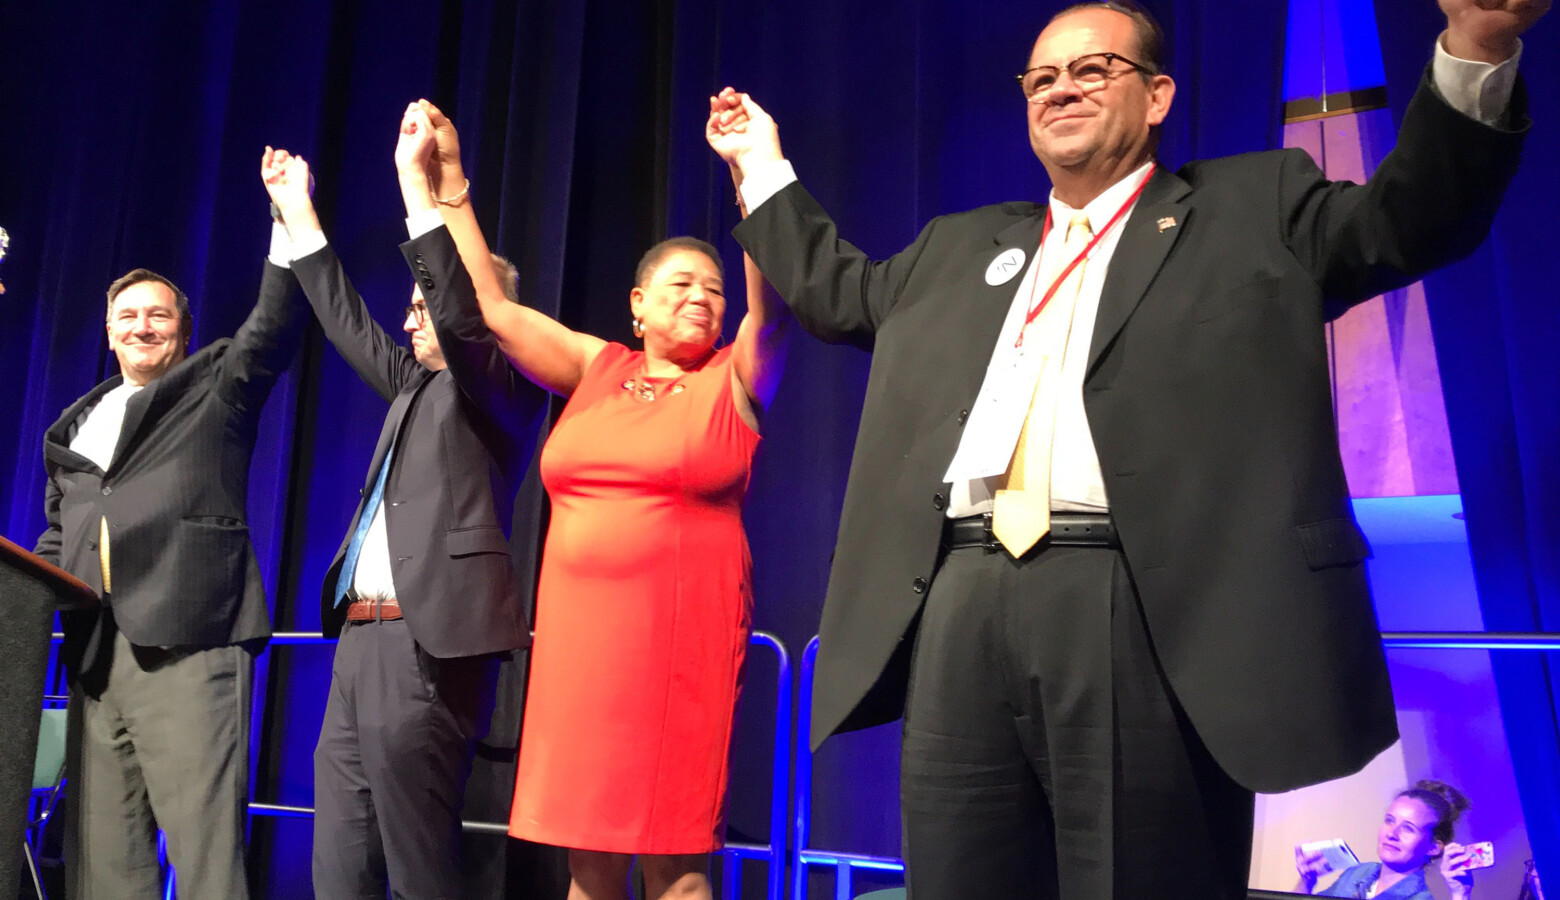 A state party convention staple that will be missing this year: in 2018, Indiana Democrats' statewide candidates joined hands on stage as the convention wrapped up. (FILE PHOTO: Brandon Smith/IPB News)